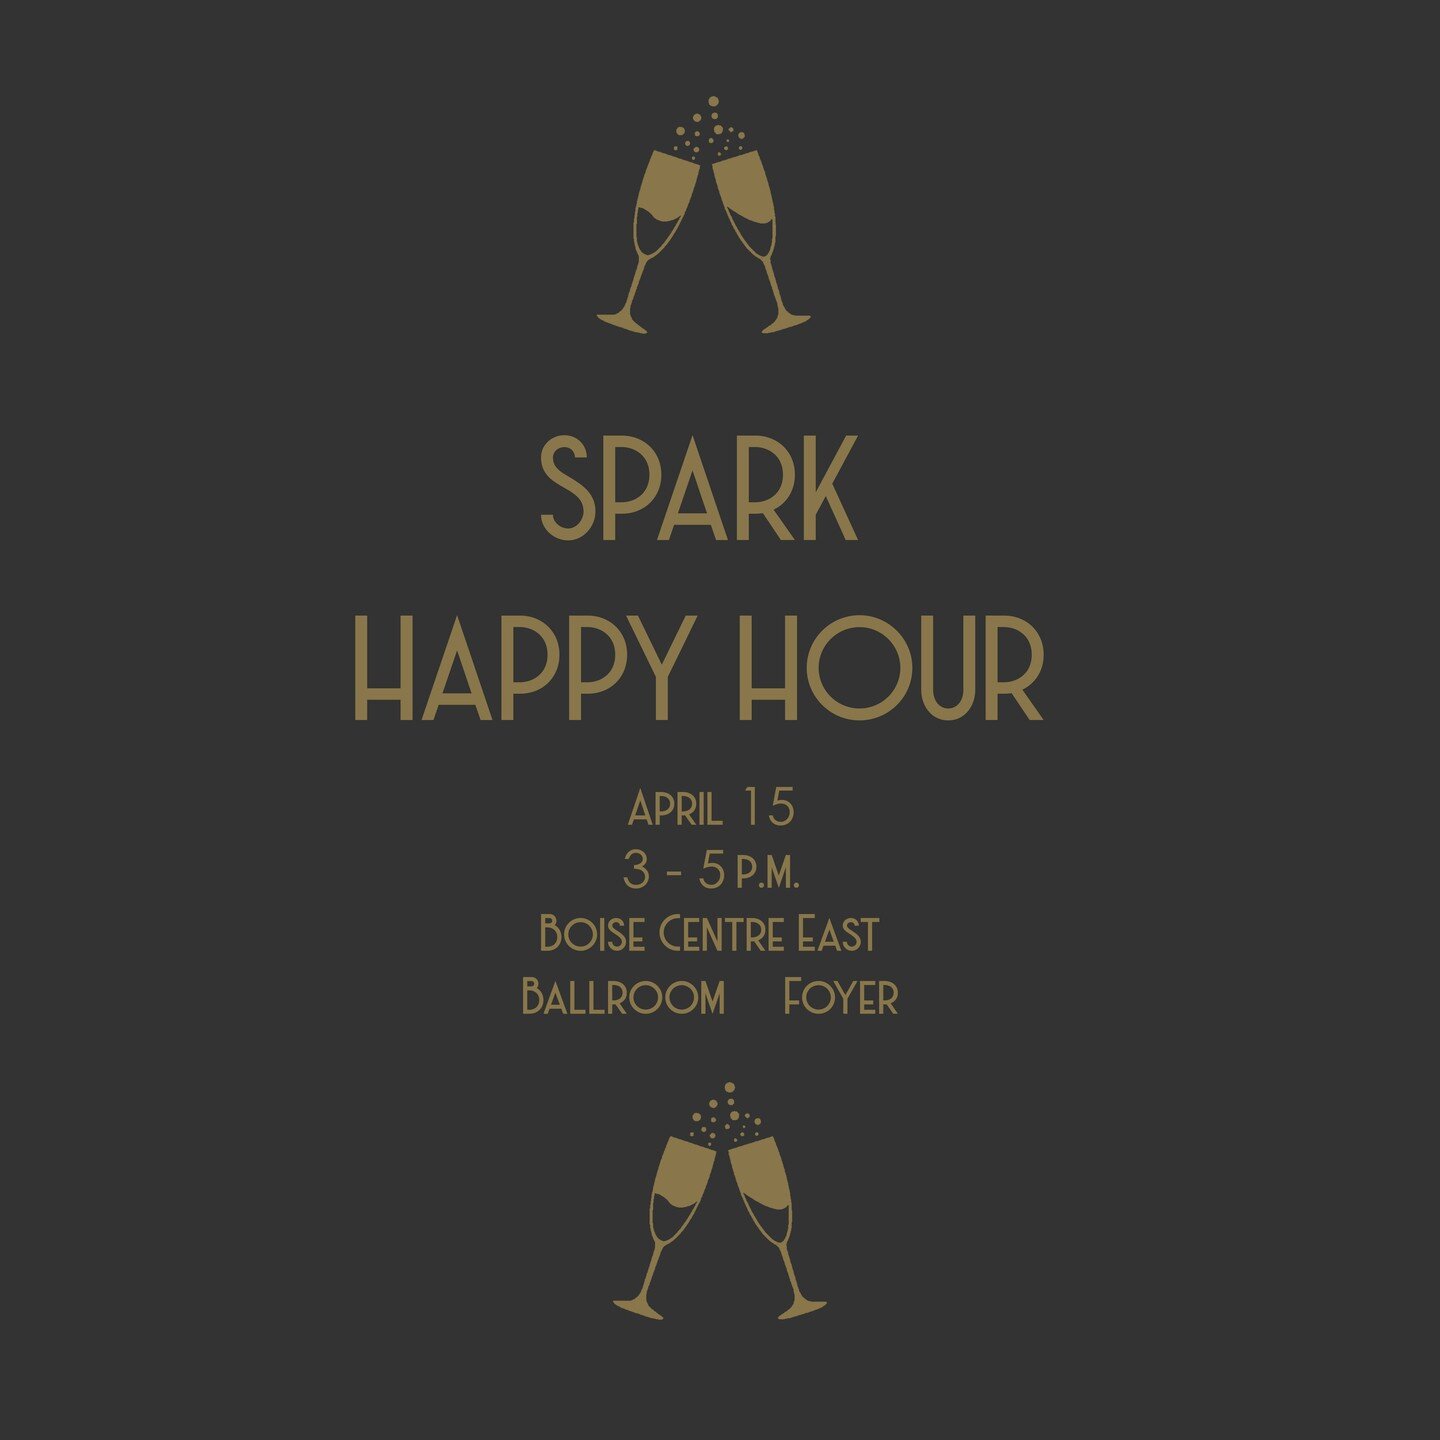 SPARK will have a HAPPY HOUR to kick off the Chair Affair weekend festivities. Come join us on Friday for drinks and some fantastic furniture and material vendors!